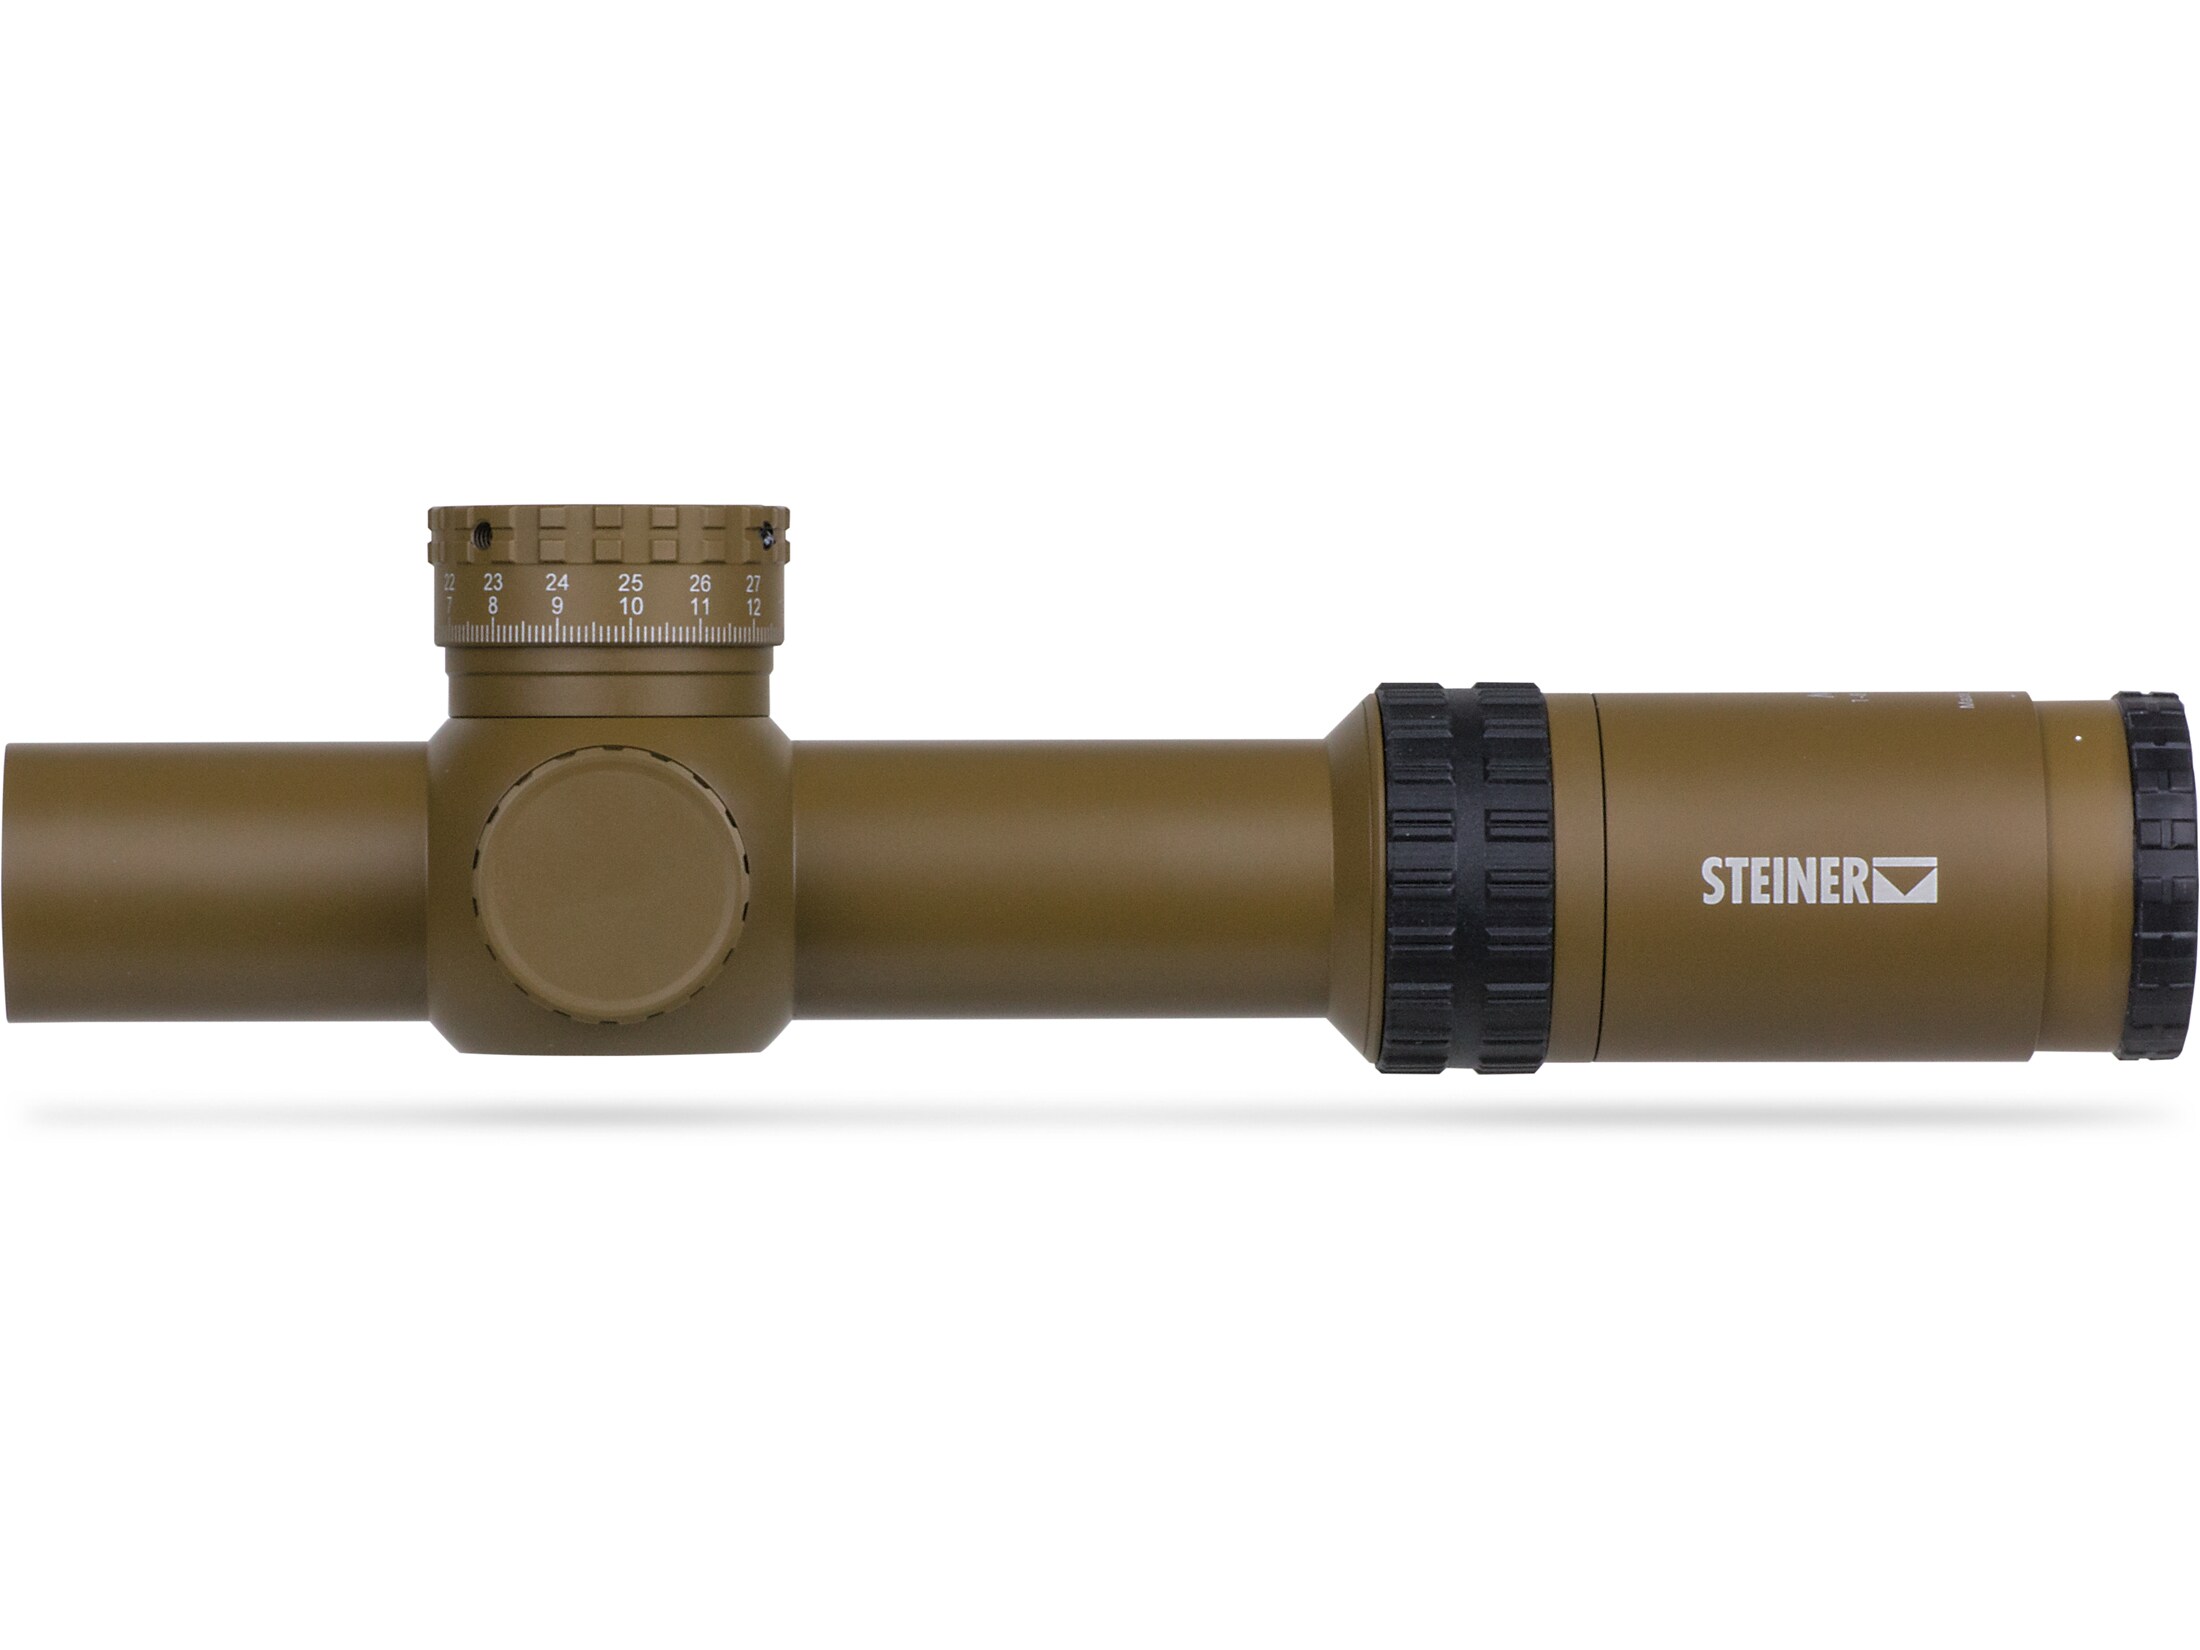 Steiner M8Xi IFS Rifle Scope 34mm Tube 1-8x 24mm CCW Turret 1/10 MRAD Side Focus Designated Marksman Reticle For Sale